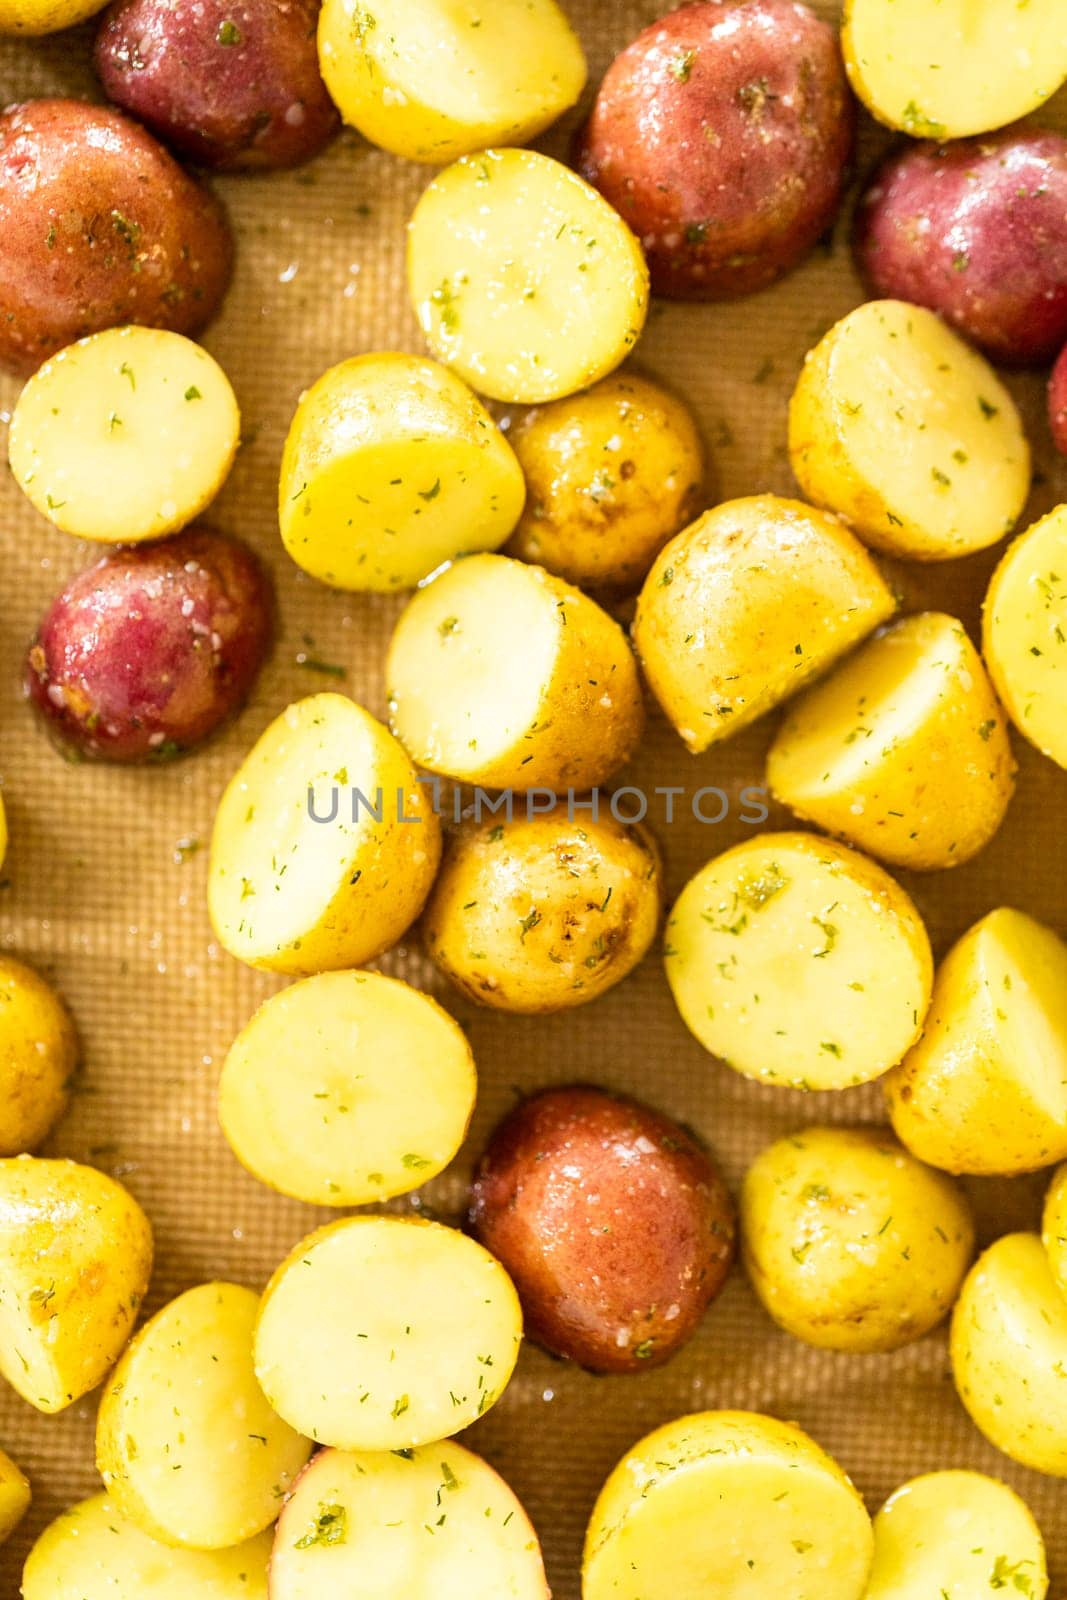 In a modern kitchen, an array of halved, multicolored marble potatoes are arranged on a baking pan lined with a silicone liner. The roasting process infuses the kitchen with a mouthwatering aroma, indicating a delicious side dish in the making.